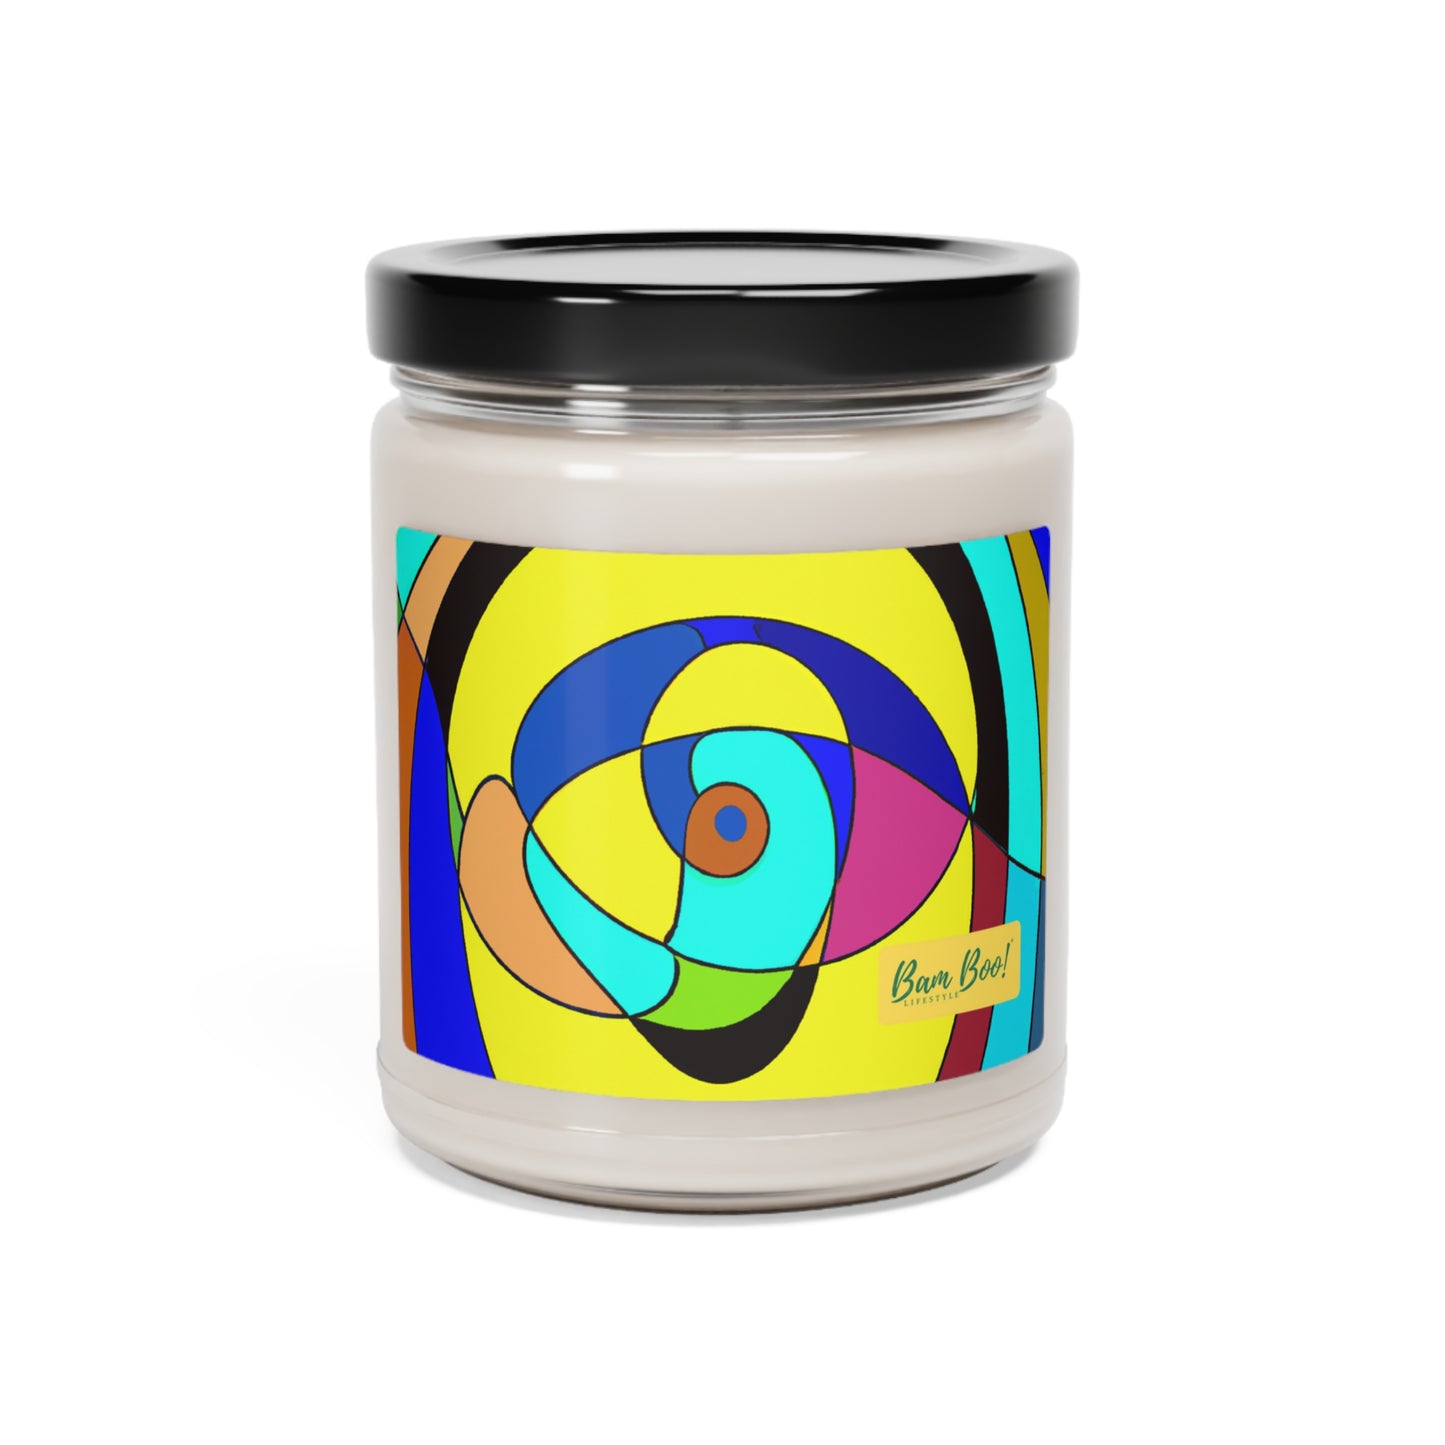 "The Prism of Emotions" - Bam Boo! Lifestyle Eco-friendly Soy Candle